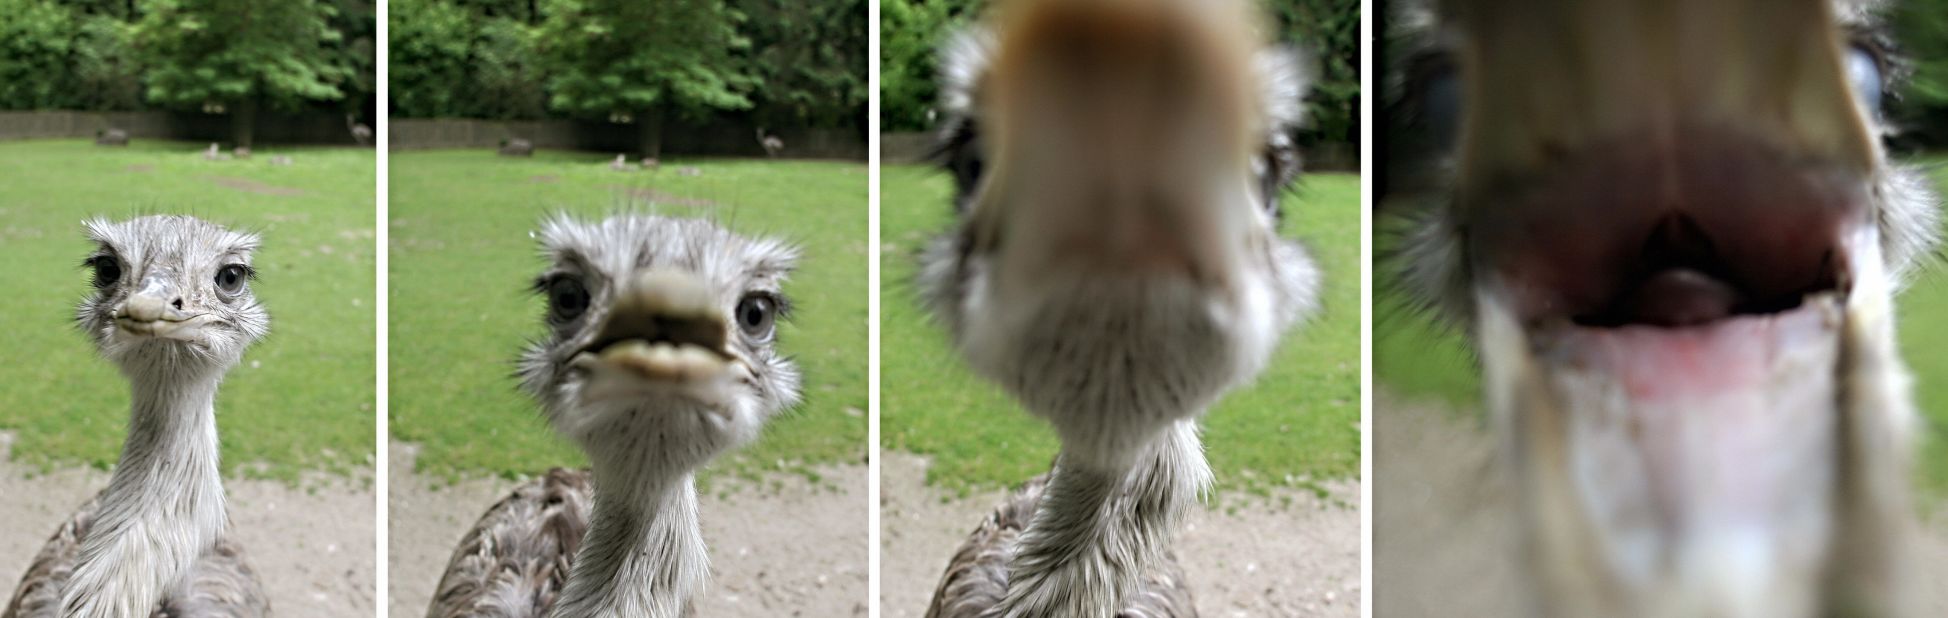 UK Animal welfare charity the RSPCA has warned that rheas, which have sharp claws and beaks, can be dangerous if they feel threatened.